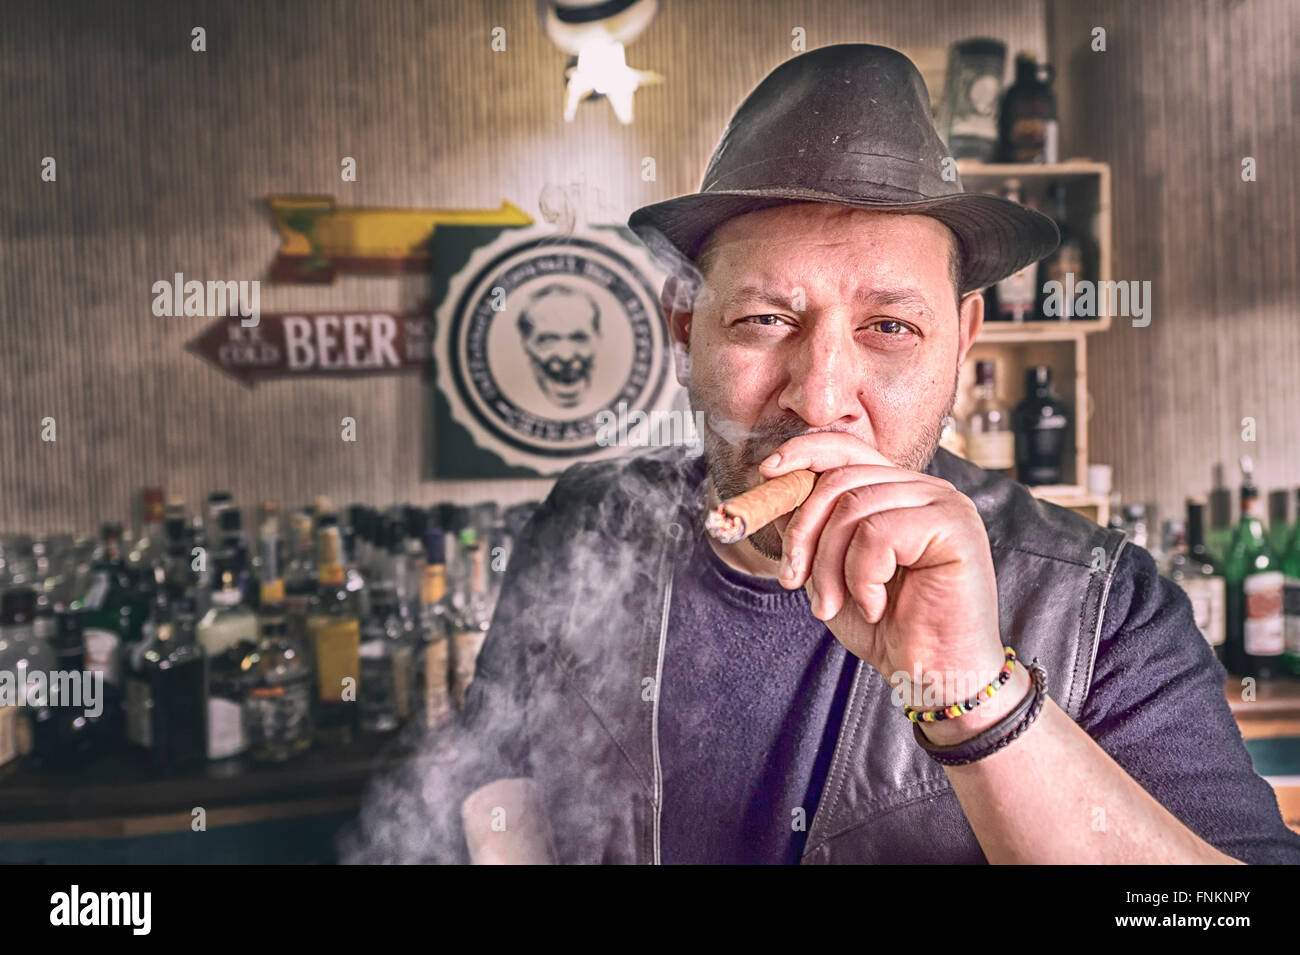 Man with cigar and hat in the pub, hi have black jacket Stock Photo